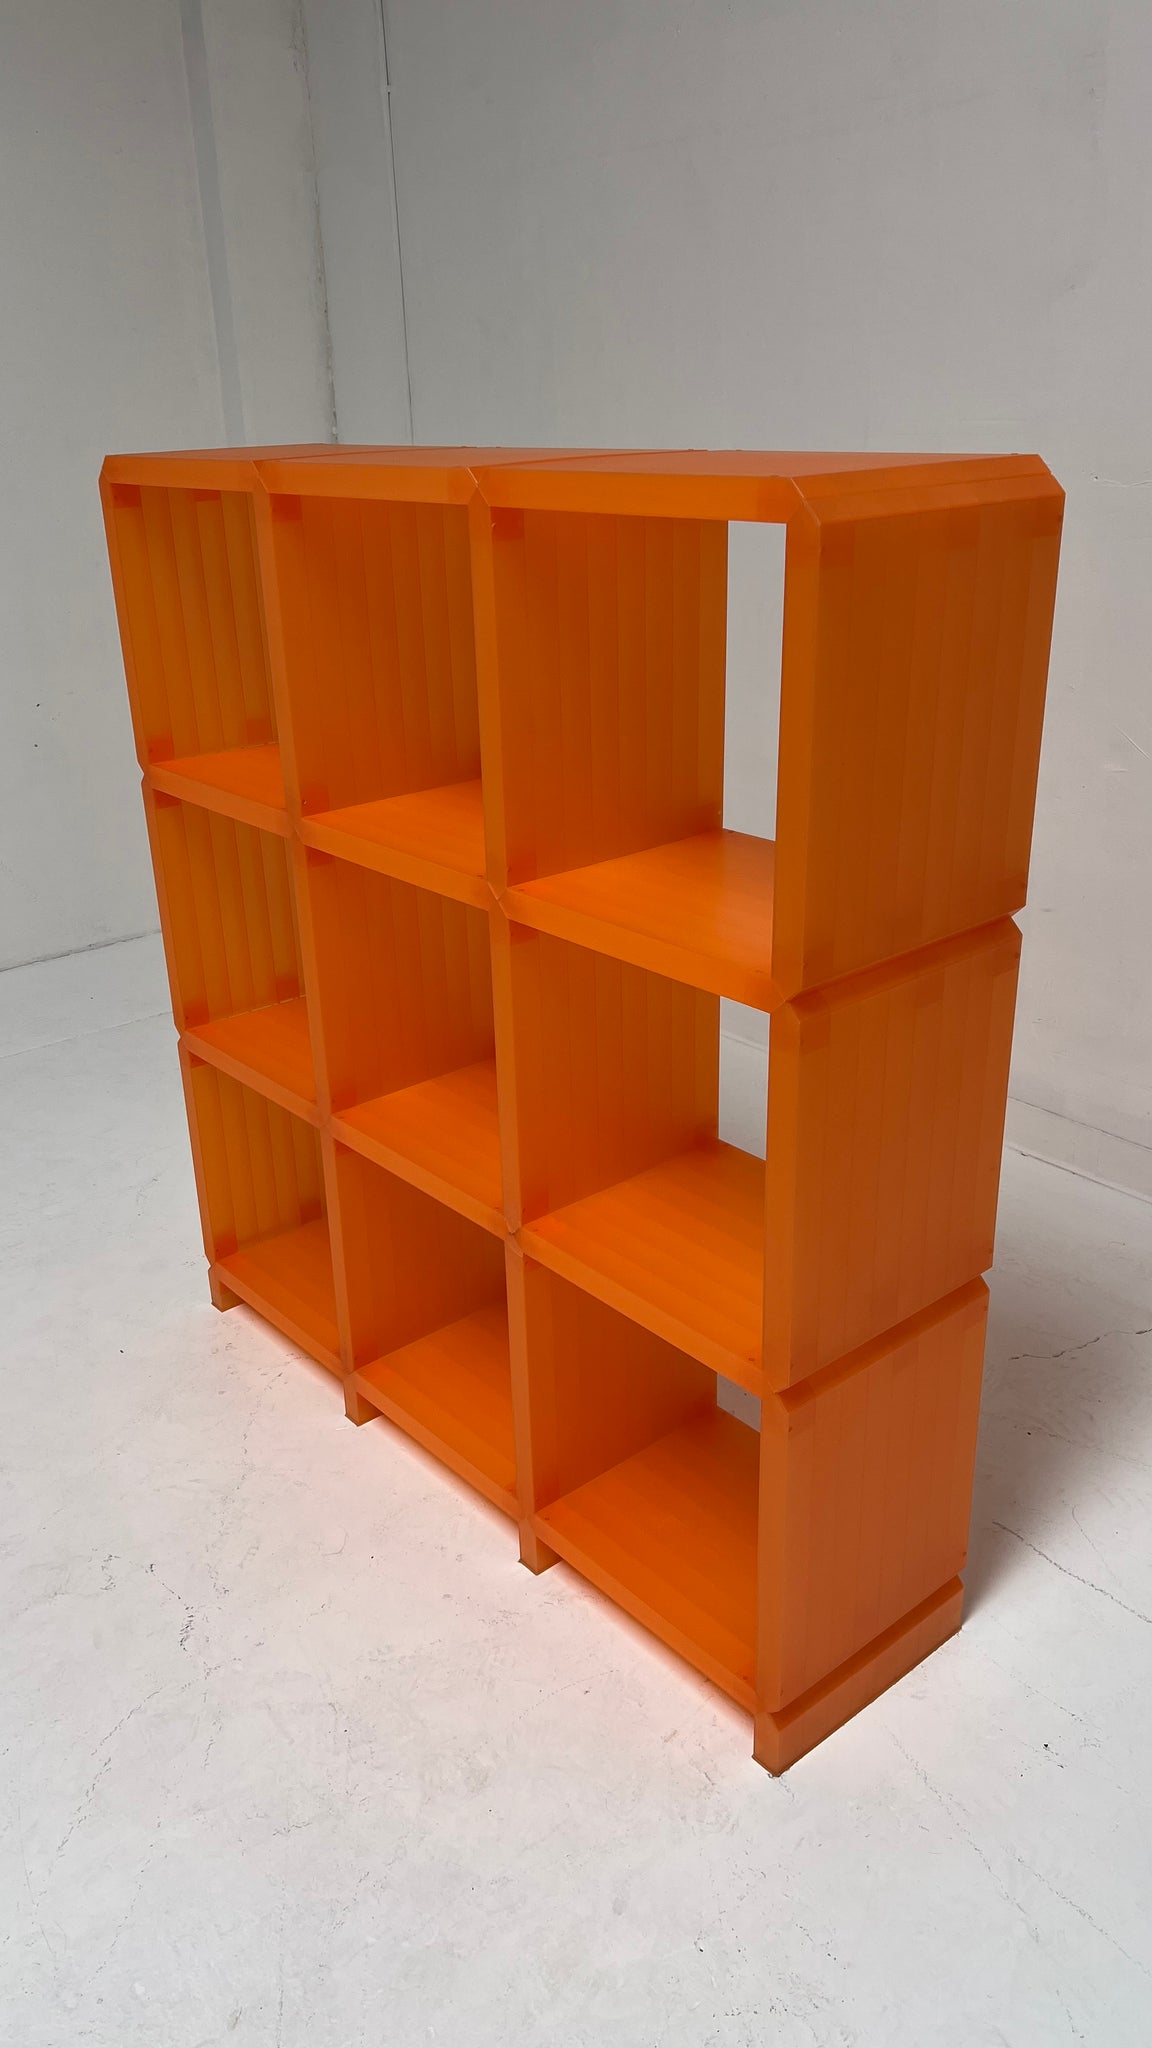 1998 Design Within Reach Cubitec Shelving System